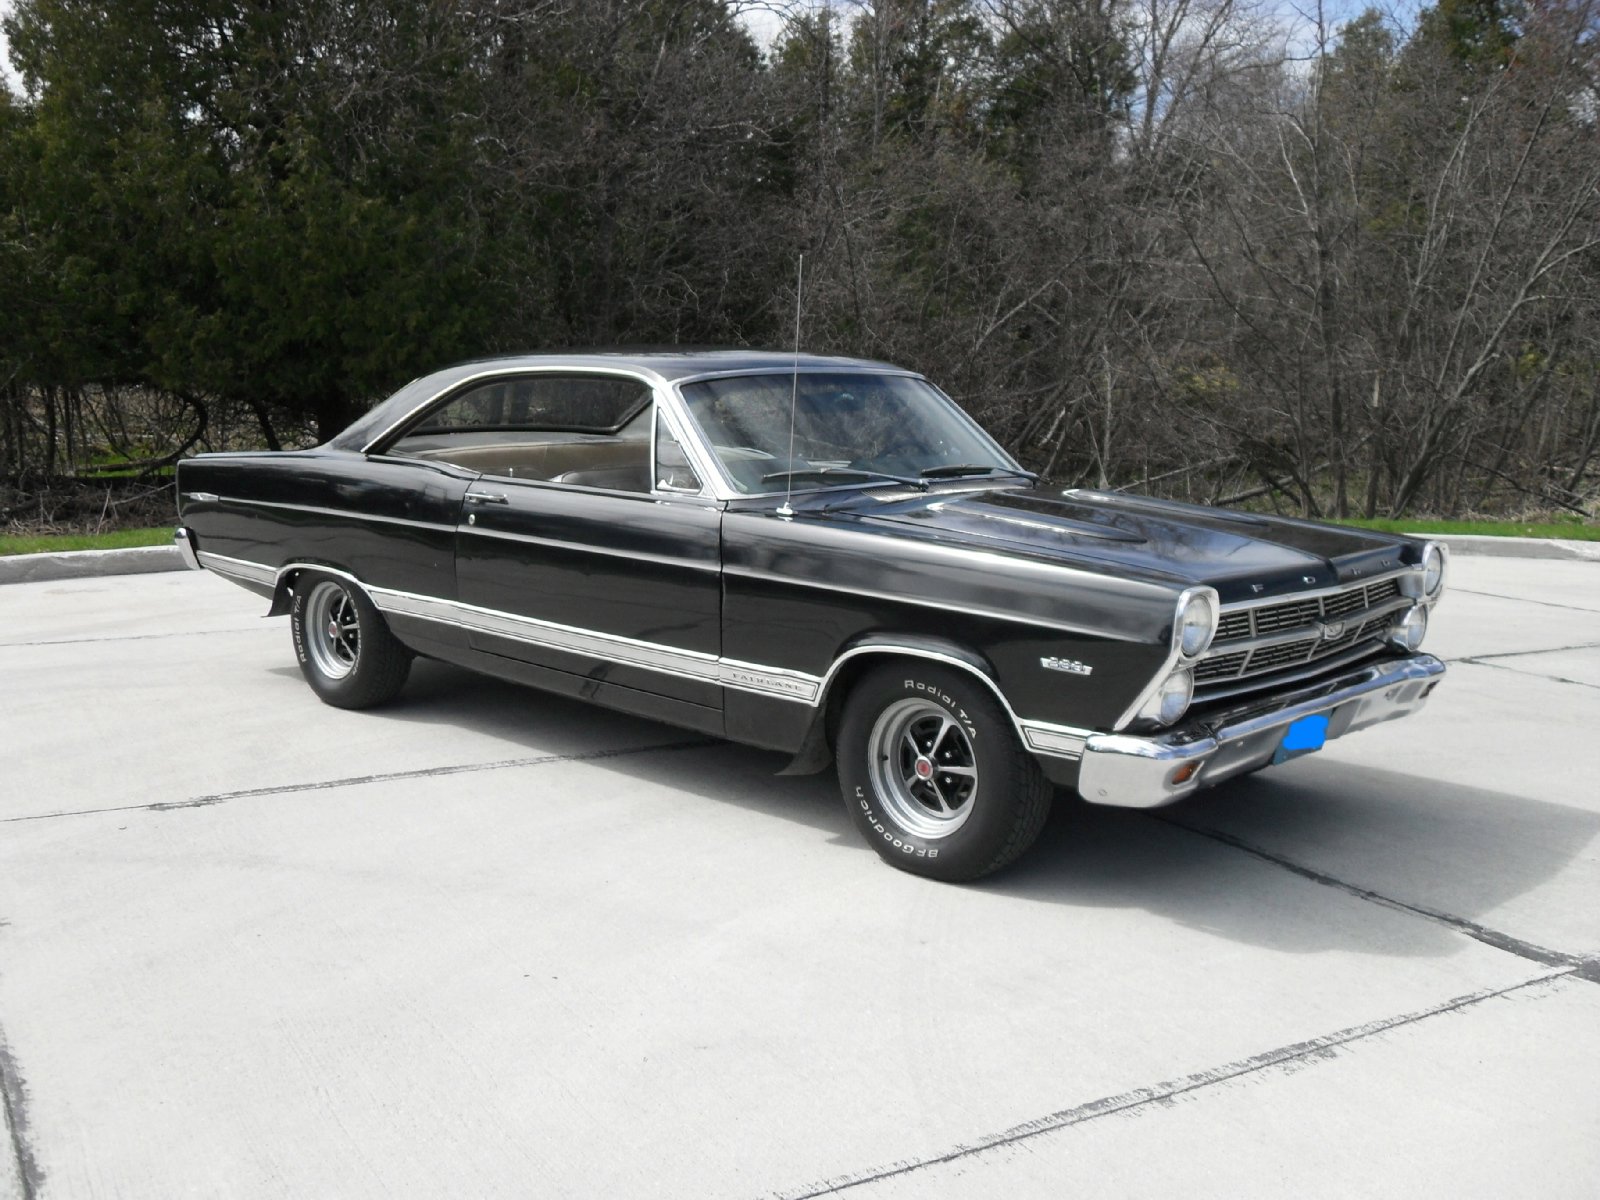 Ford Fairlane 500 Xl Wallpapers